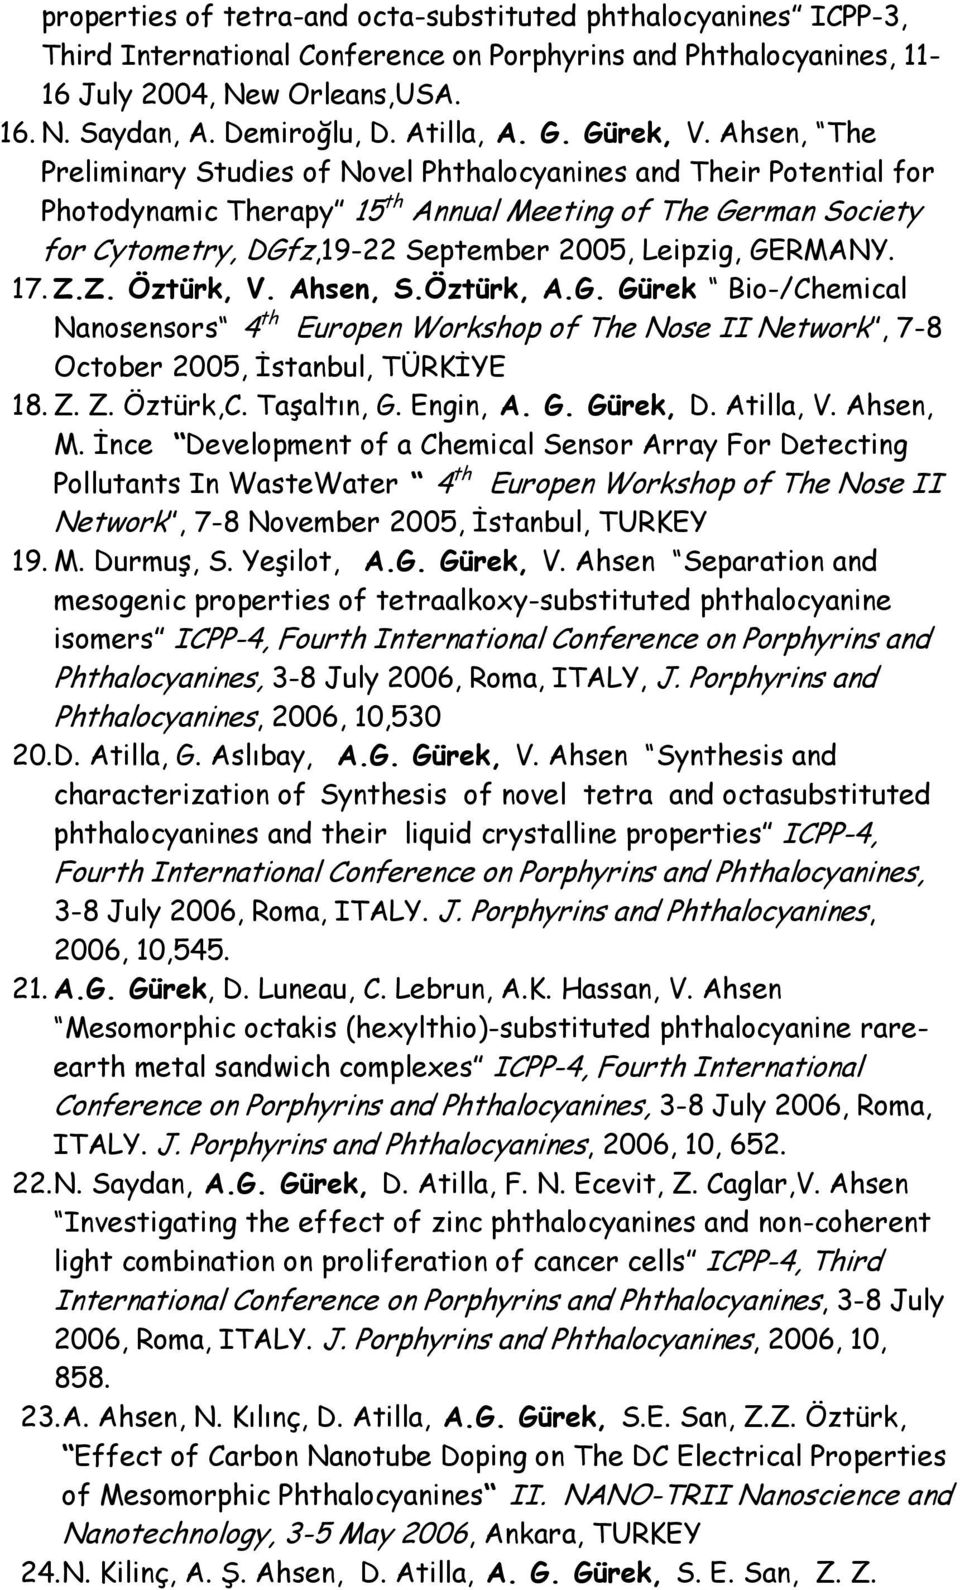 Ahsen, The Preliminary Studies of Novel Phthalocyanines and Their Potential for Photodynamic Therapy 15 th Annual Meeting of The German Society for Cytometry, DGfz,19-22 September 2005, Leipzig,